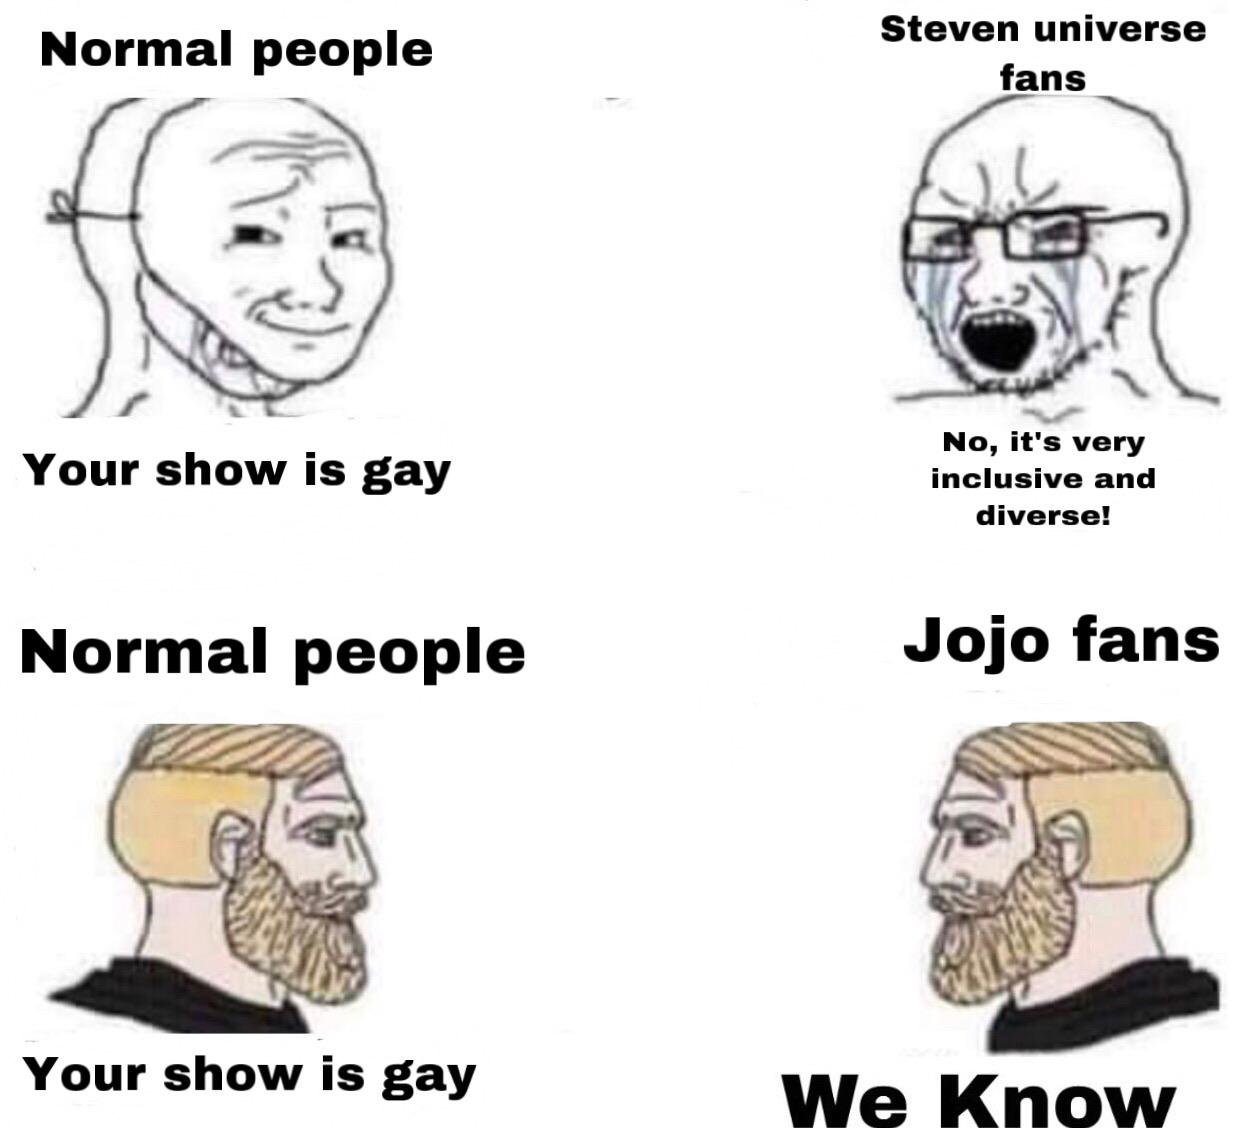 Dank, Steven, Steven Universe, JoJo, Jojo, Universe Dank Memes Dank, Steven, Steven Universe, JoJo, Jojo, Universe text: Your show is gay Normal people Your show is gay No, it's very inclusive and diverse! Jojo fans 